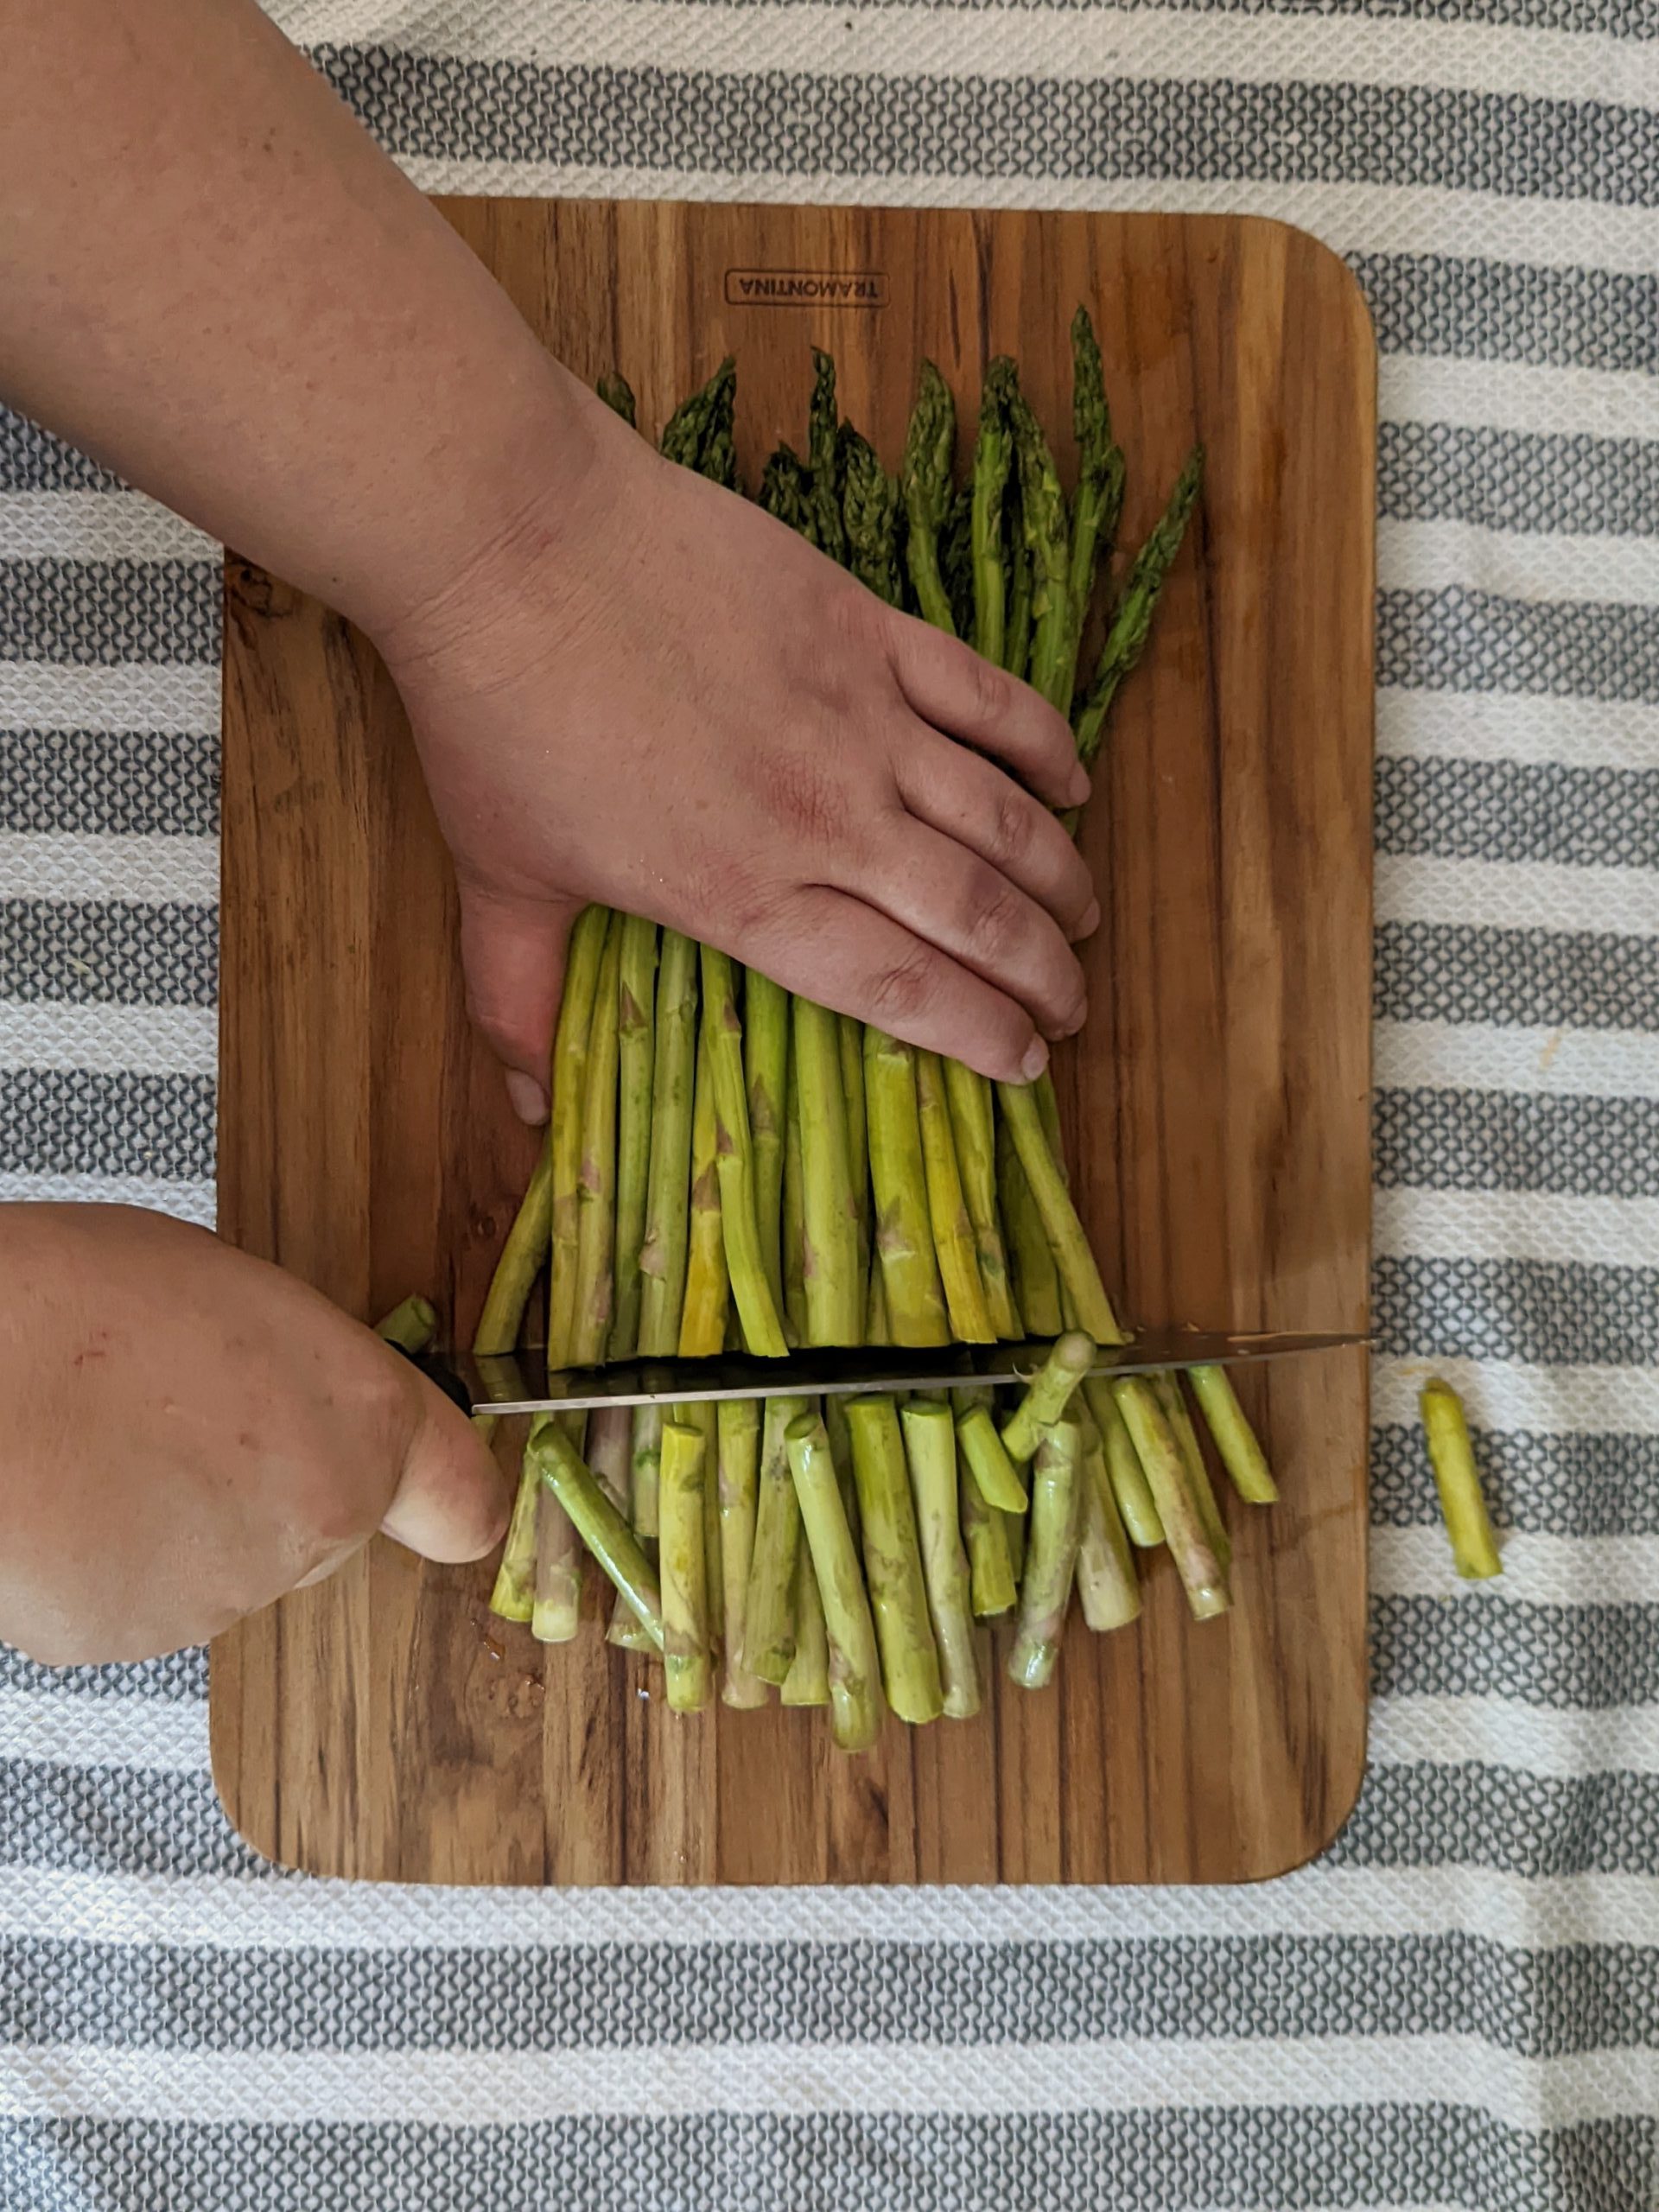 Trim the rough ends of the asparagus off of the stalk.